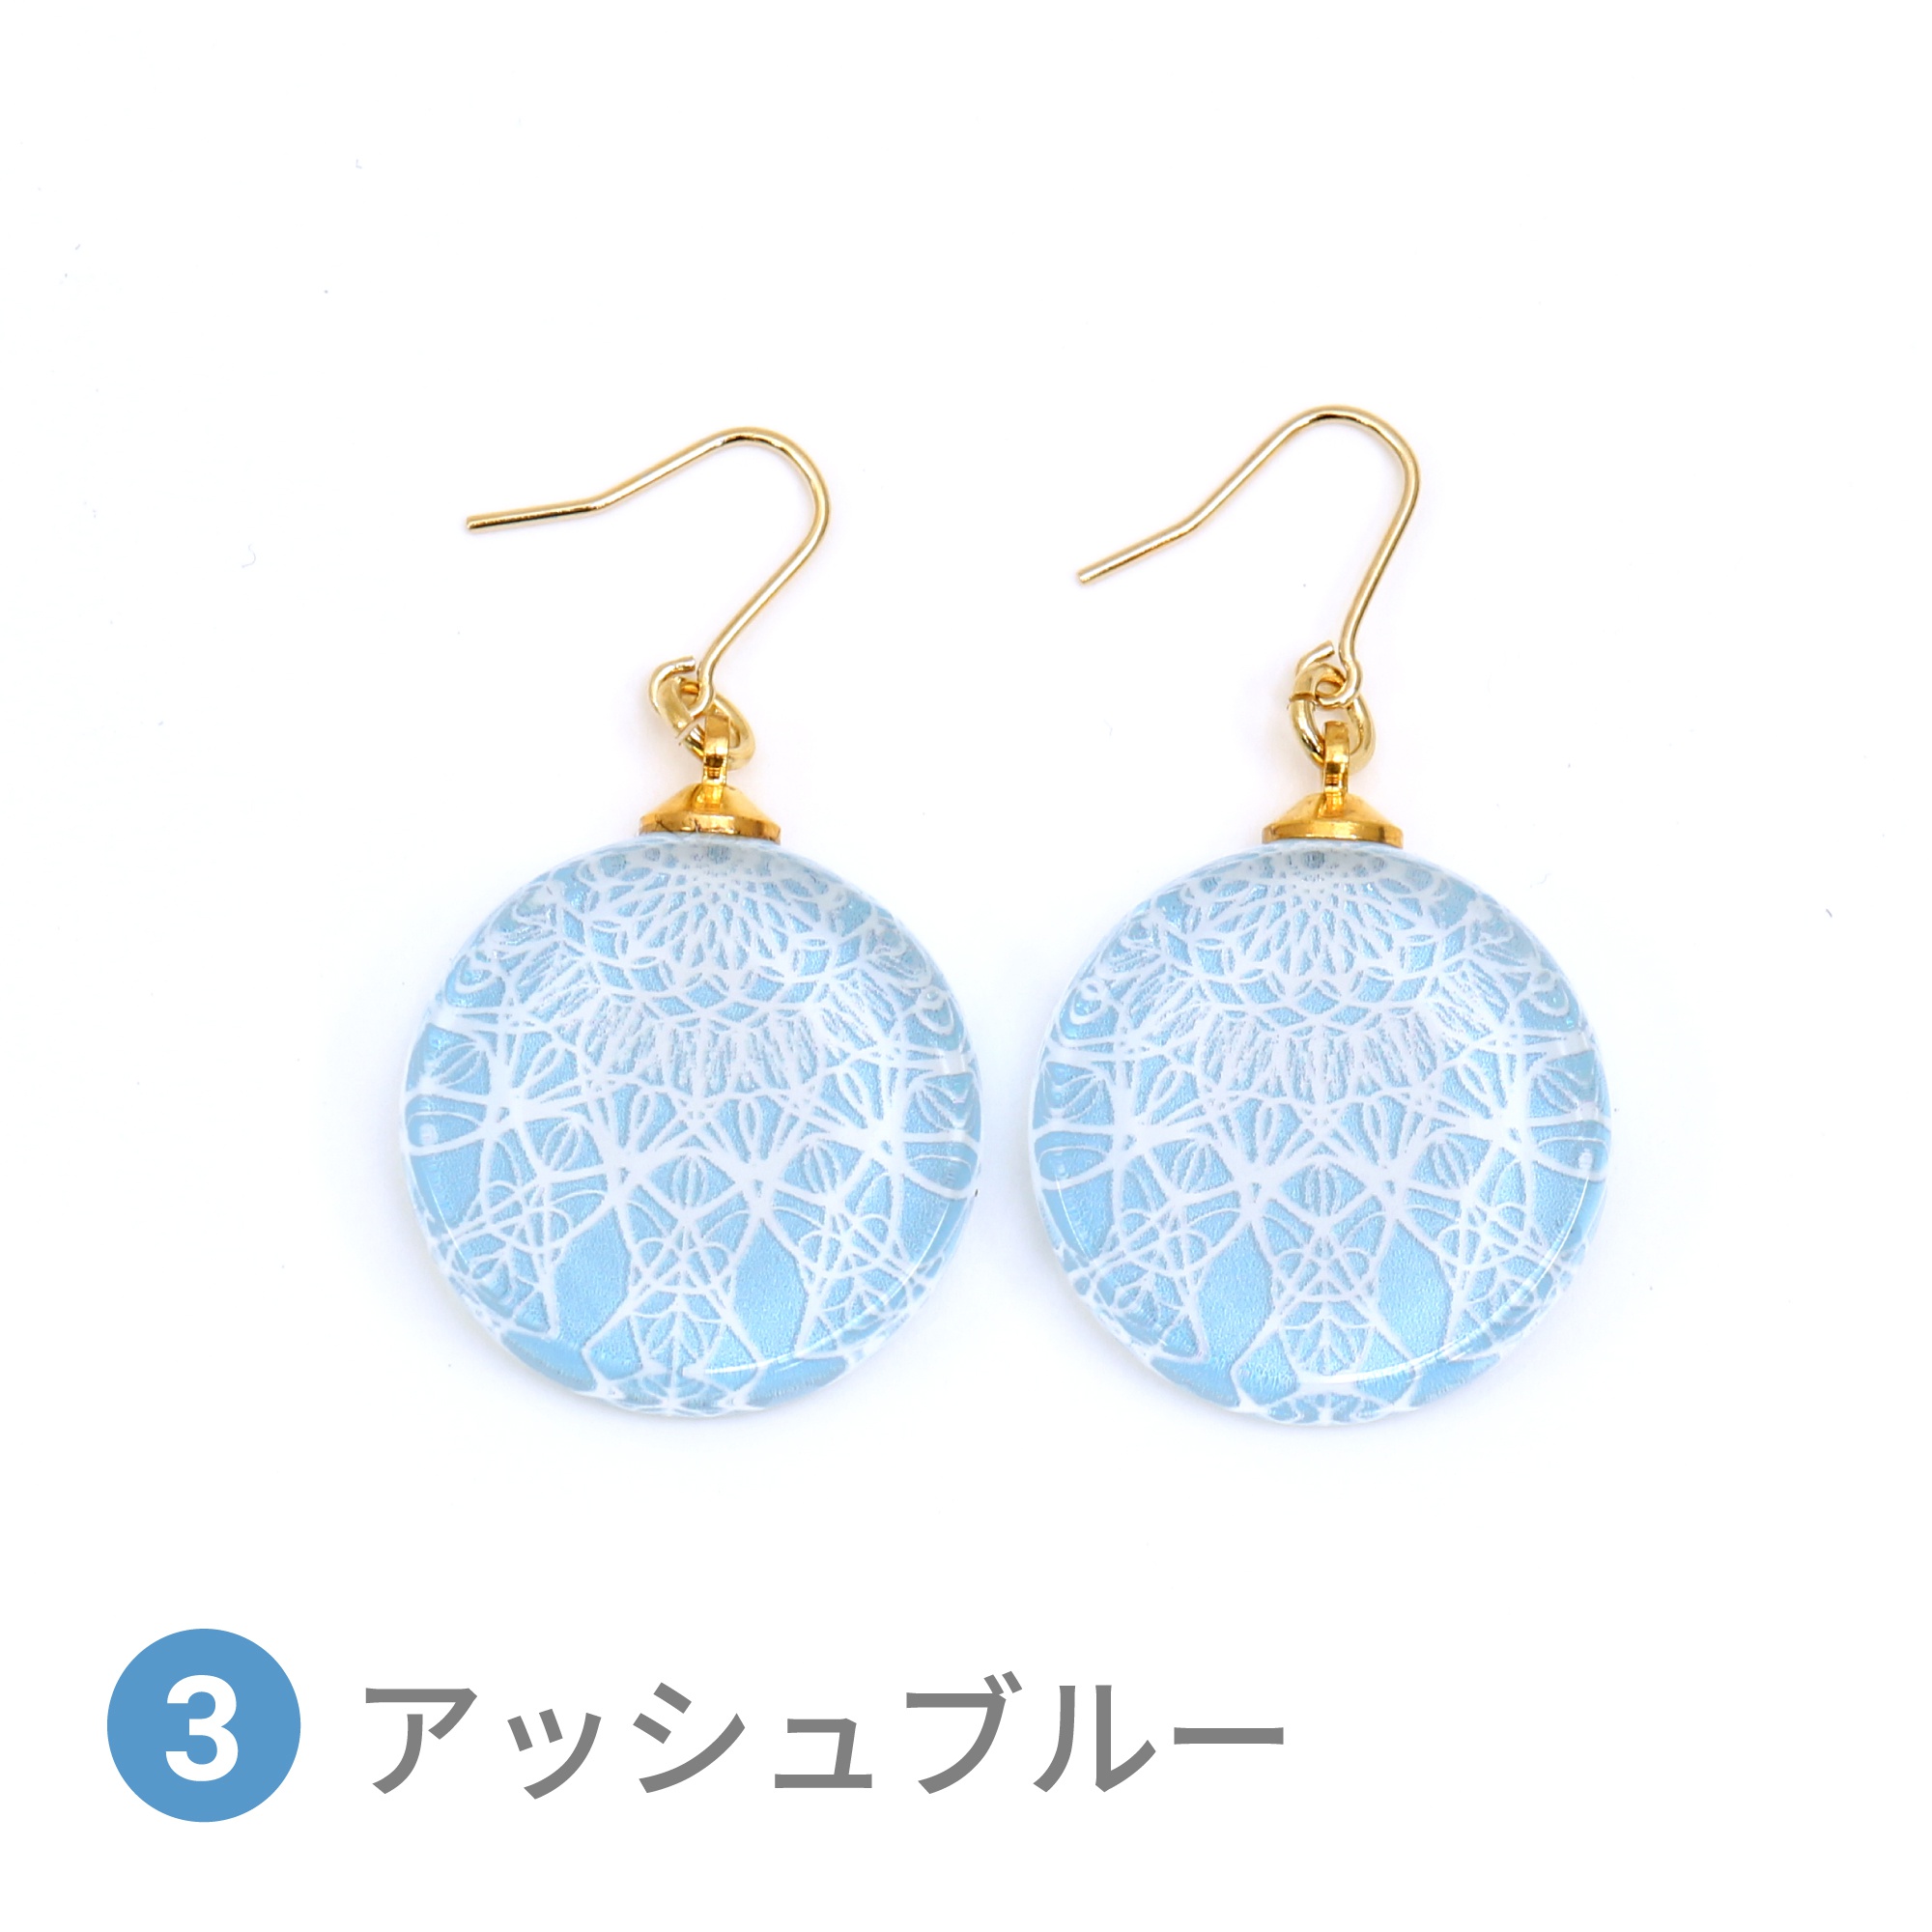 Glass accessories Pierced Earring LACE ashblue round shape